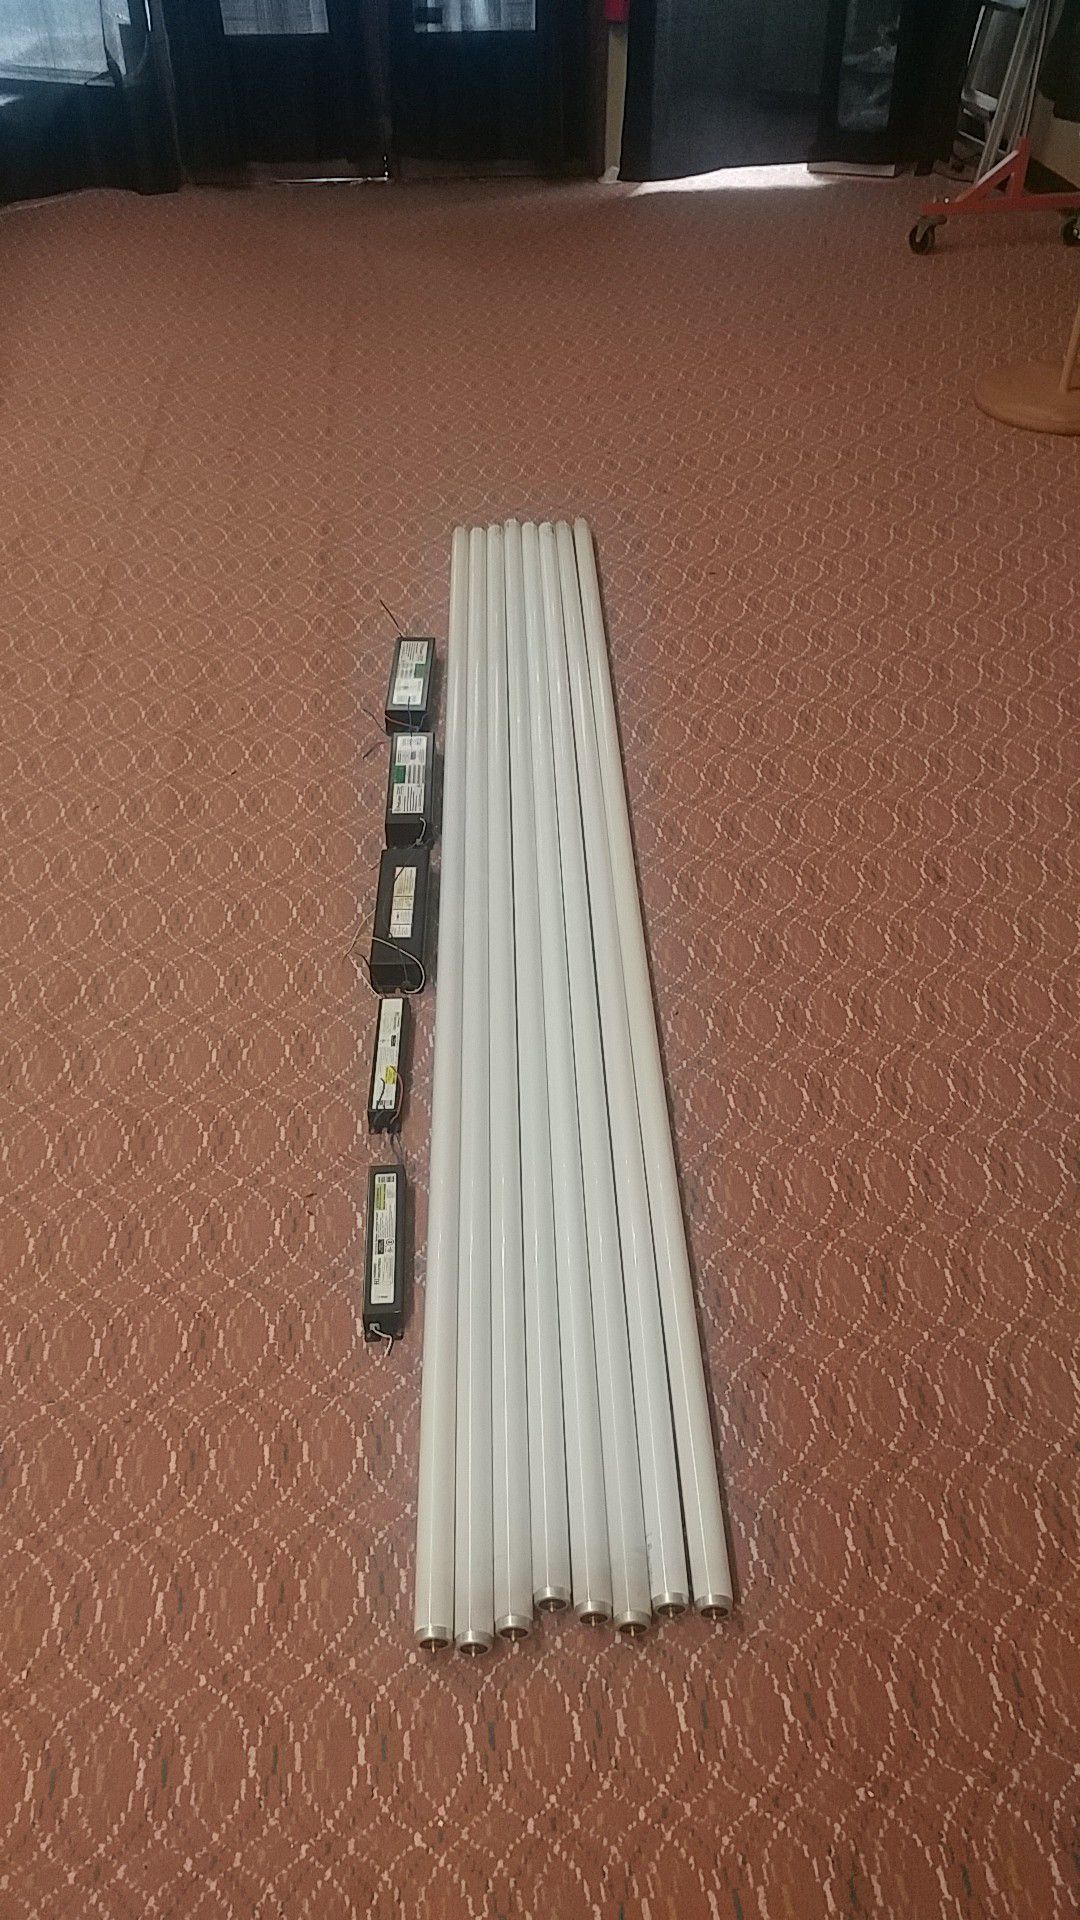 FREE fluorescent ballasts (5) and 8' foot bulbs (8)